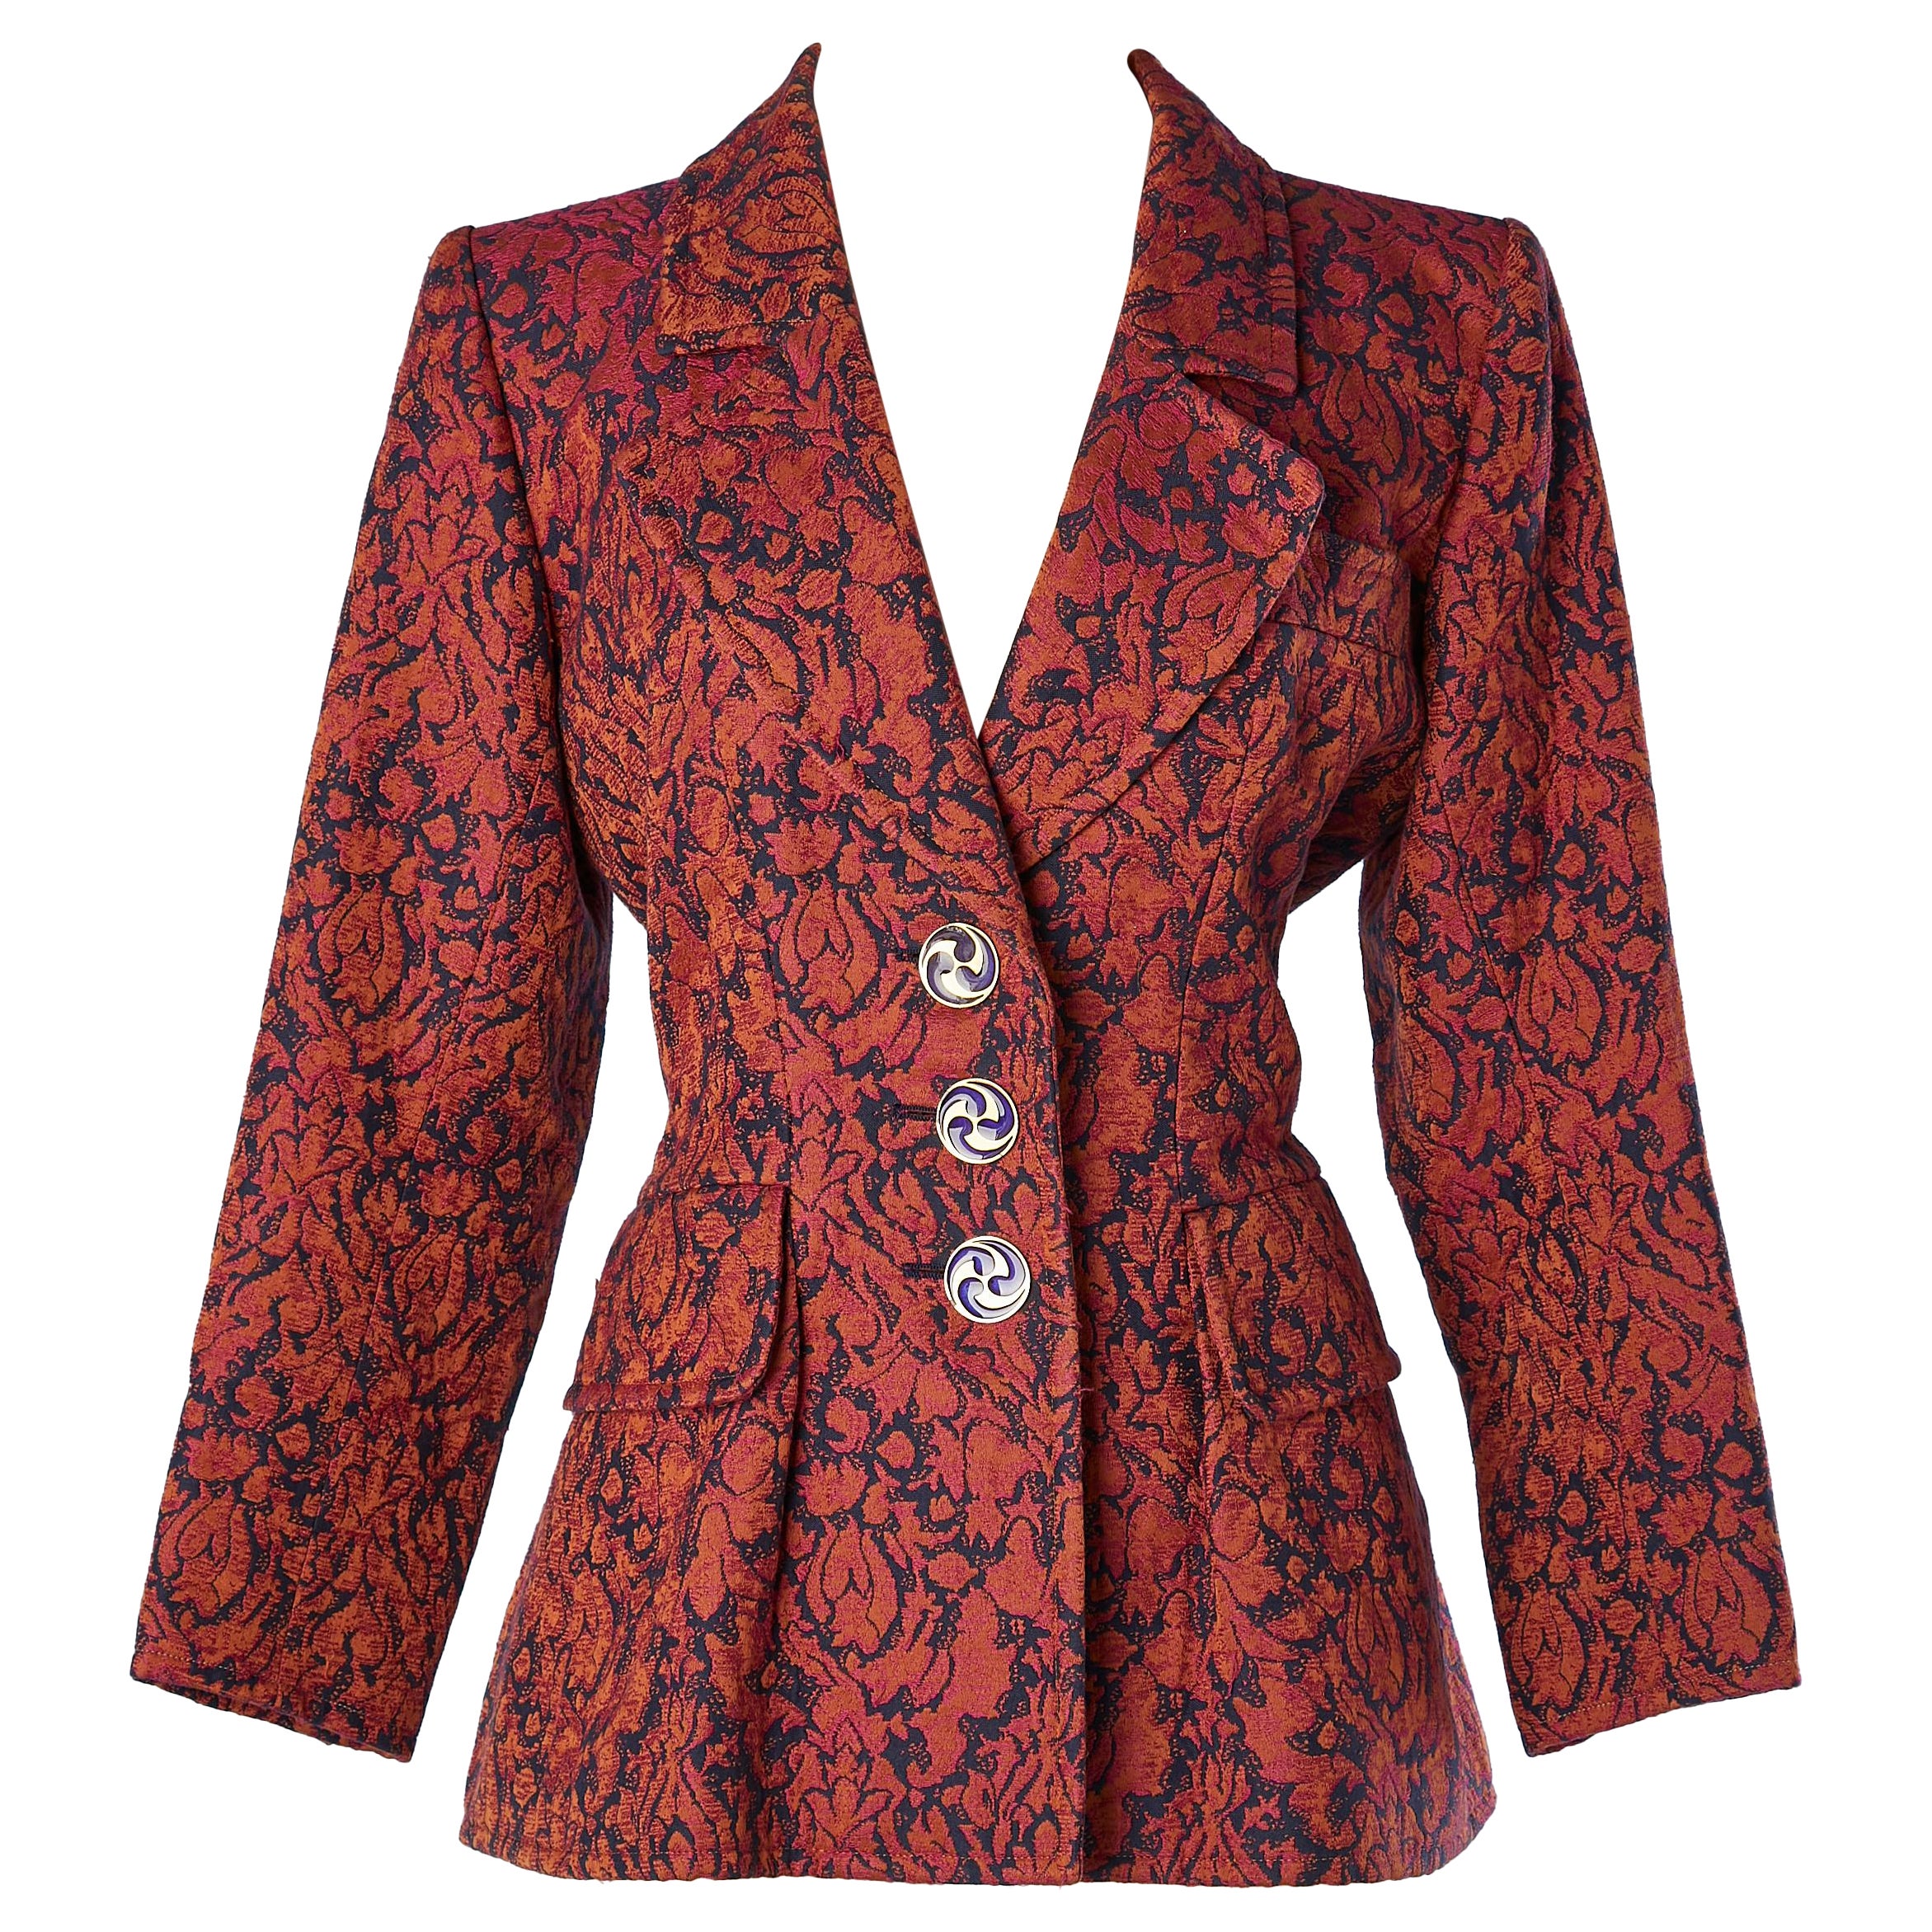 Damask evening jacket with jewelery buttons Yves Saint Laurent Rive Gauche  For Sale